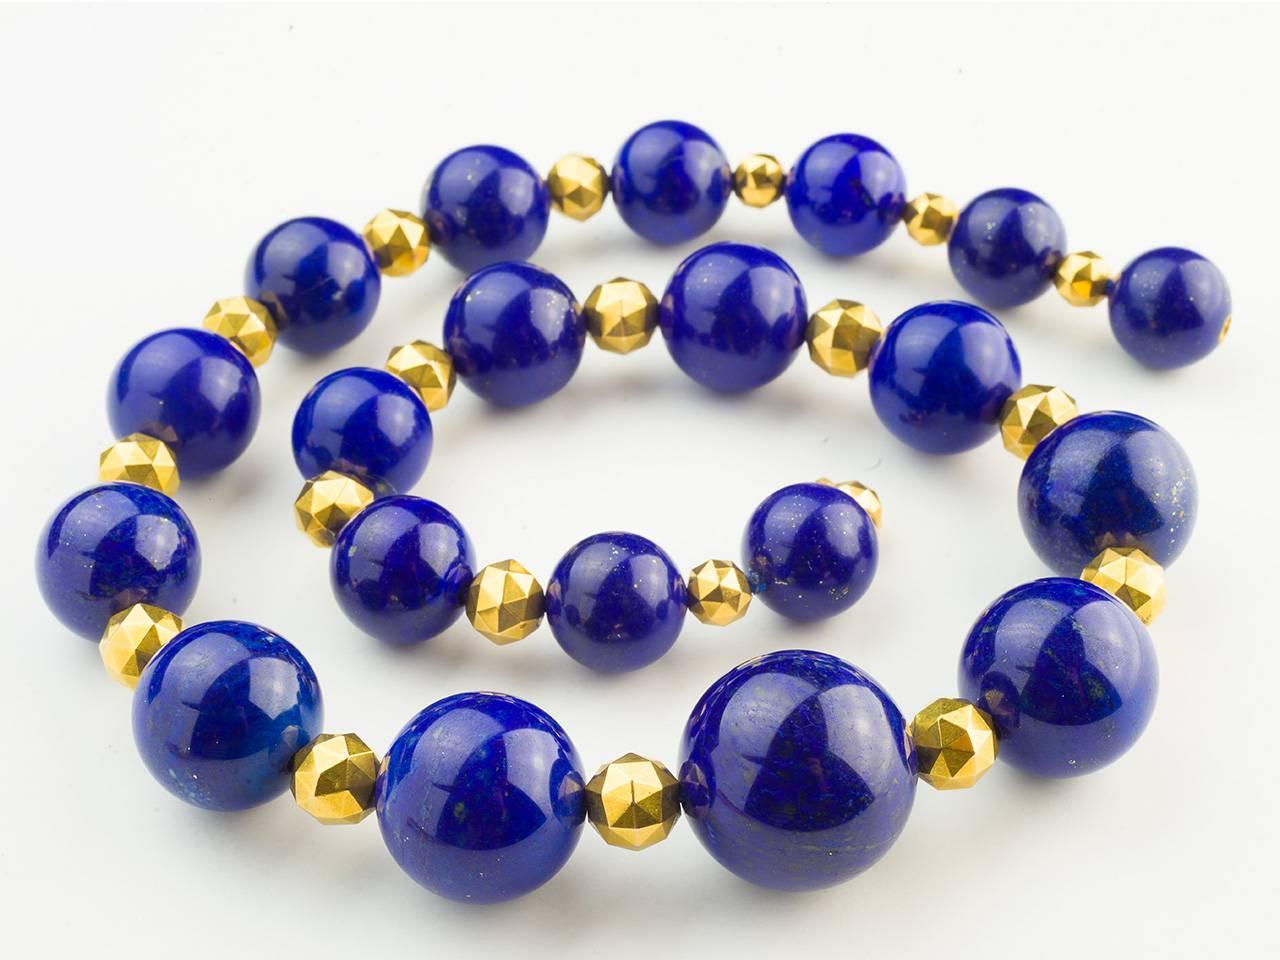 18k gold and lapis bead necklace by Carvin French, composed of 20 lapis beads, ranging in size 16-40mm. Maker's mark.